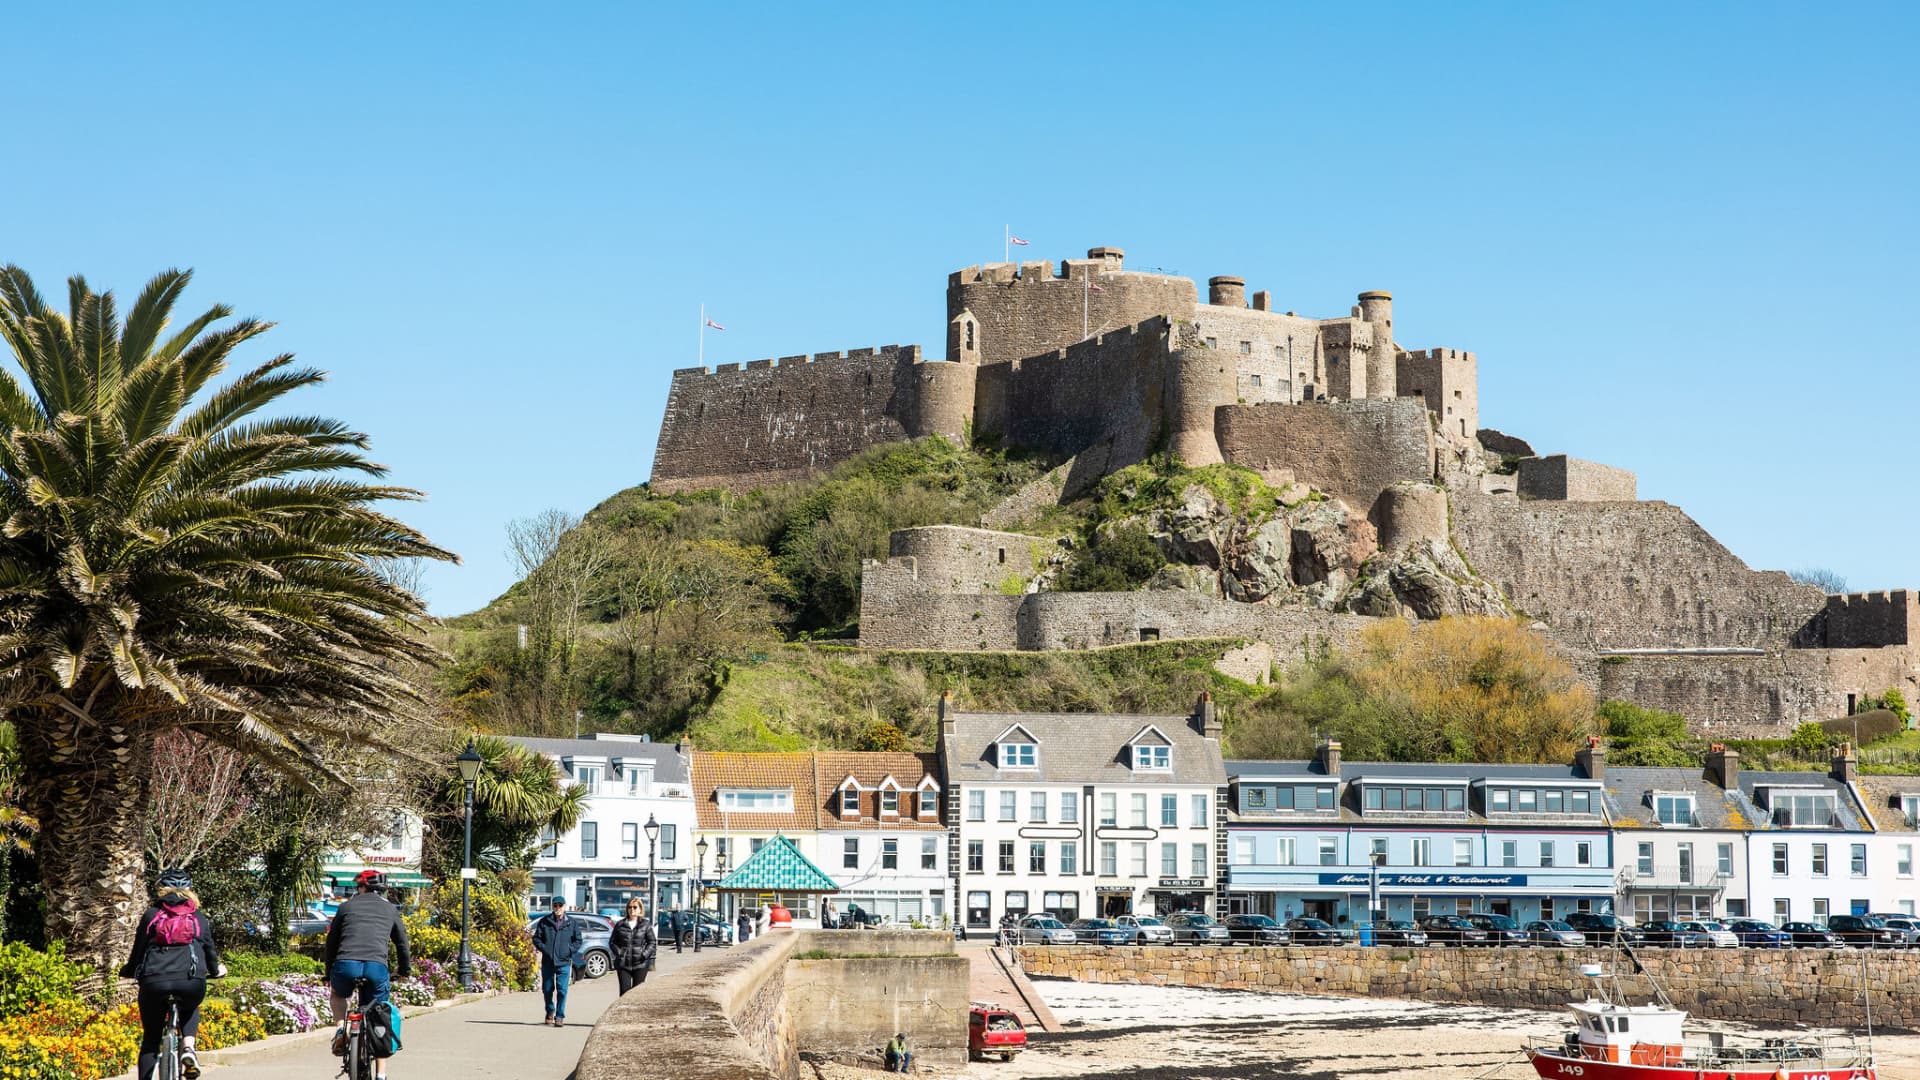 The 800-year-old Mont Orgueil Castle in Jersey, with The Moorings (blue building) in the foreground.